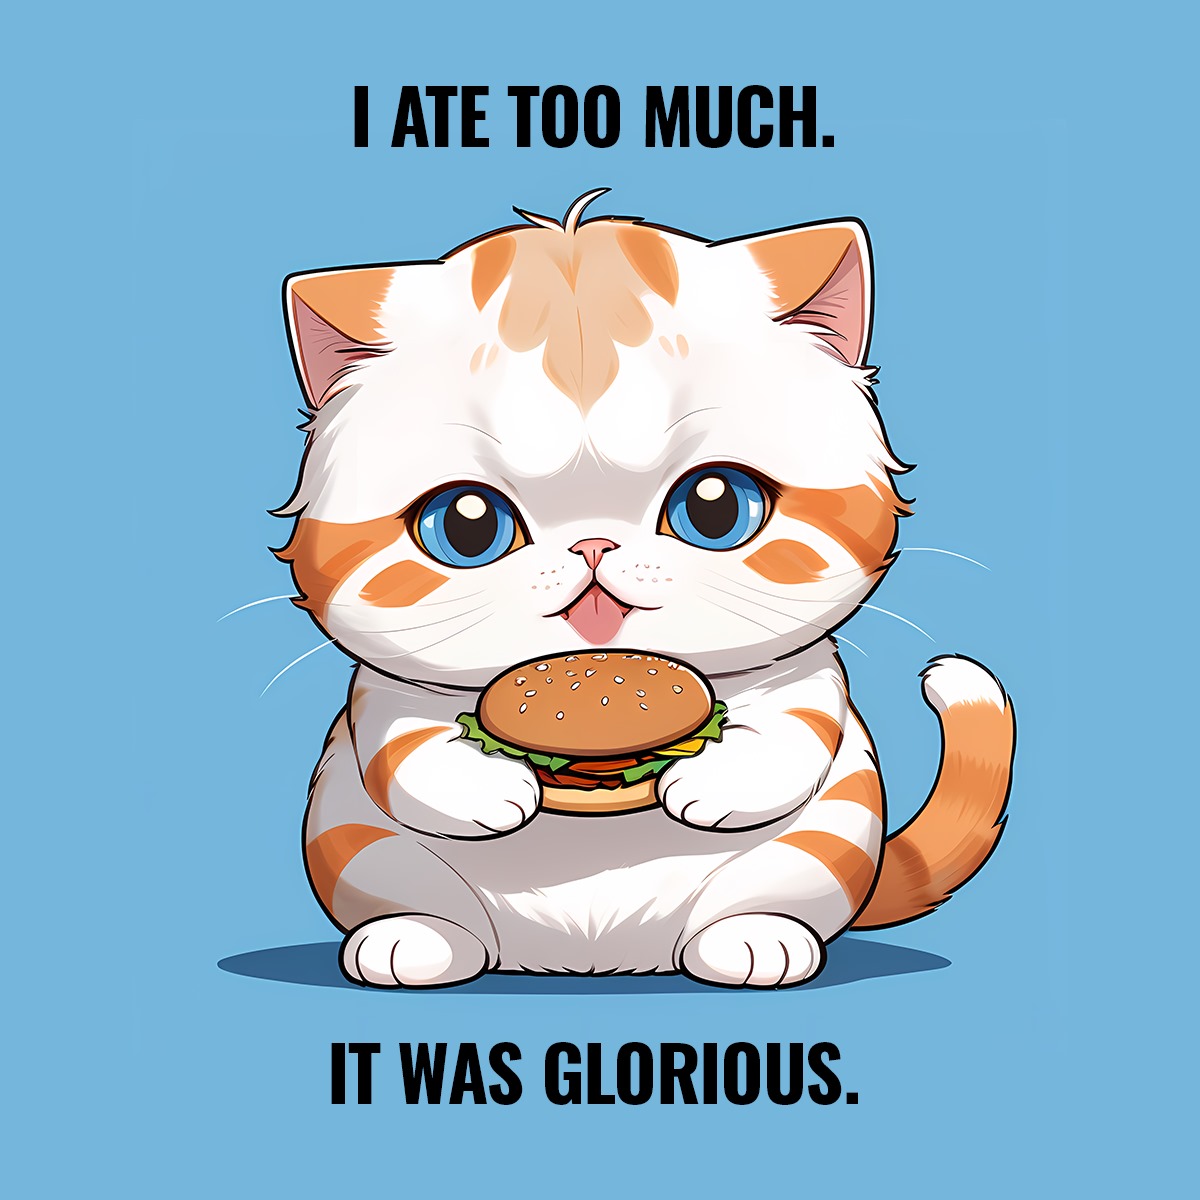 I ATE TOO MUCH. IT WAS GLORIOUS.